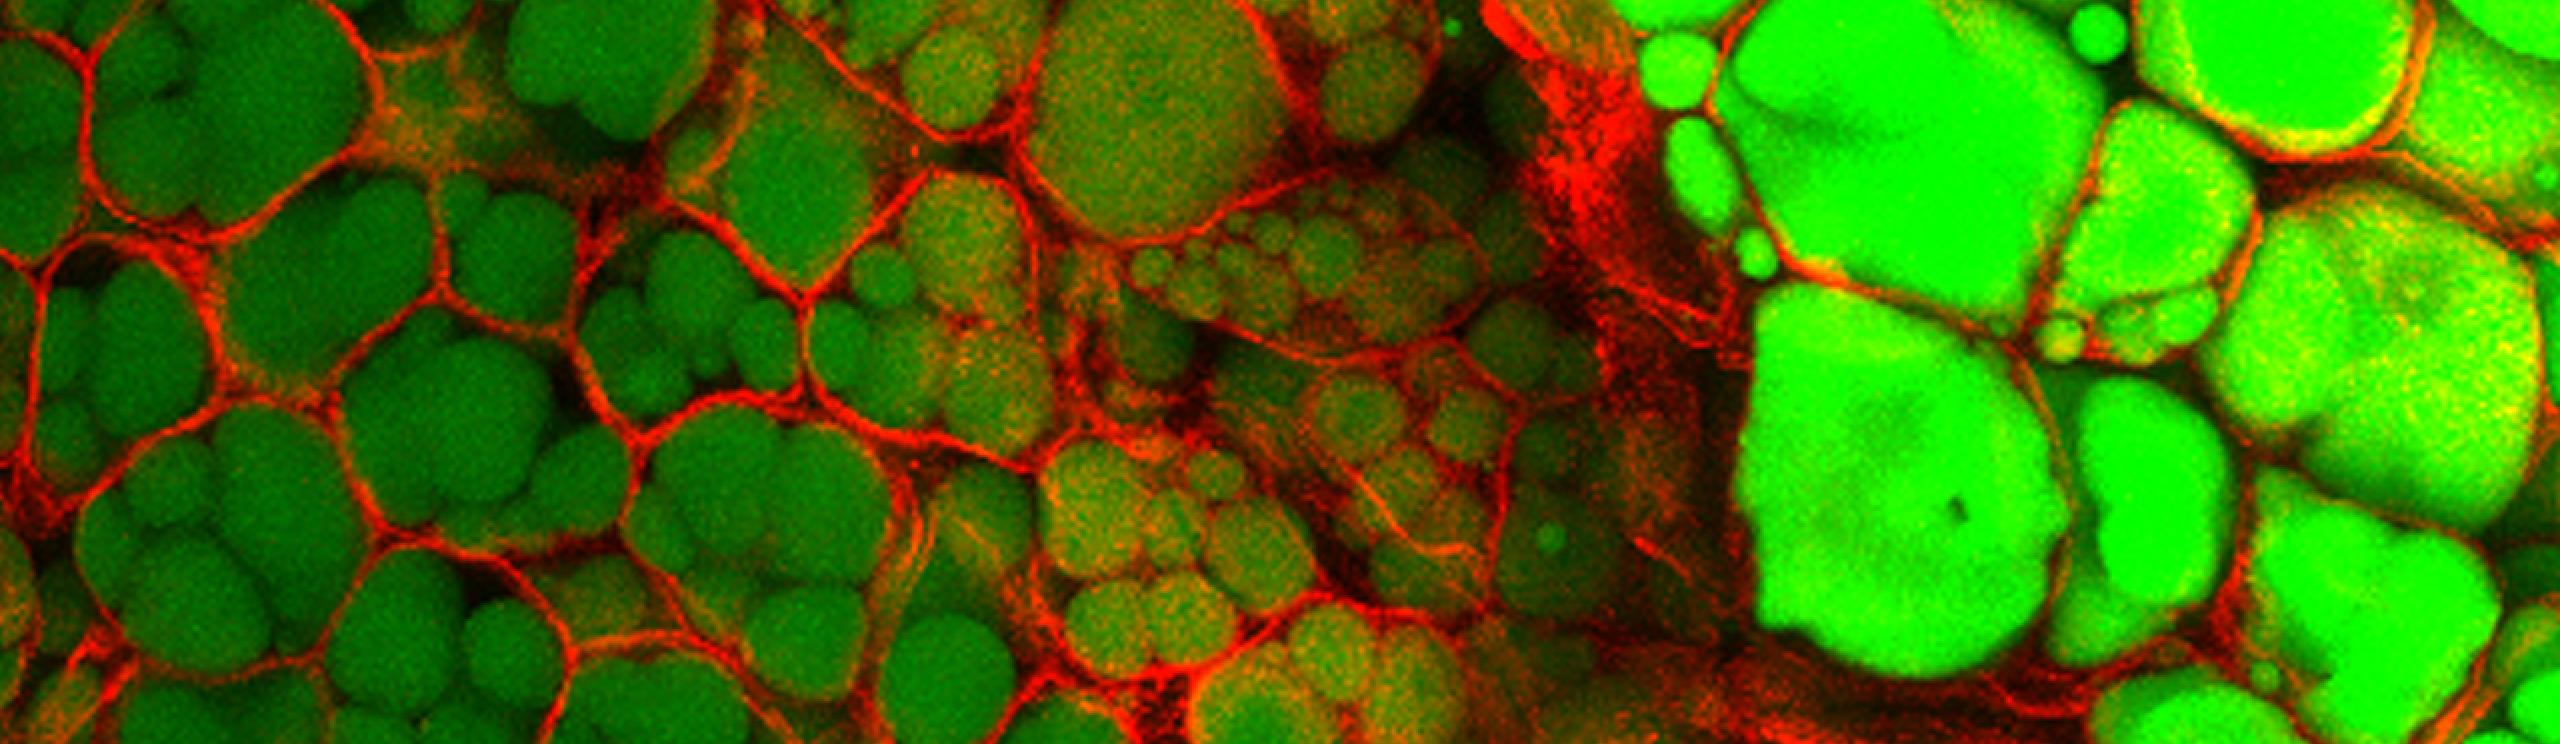 colorful fat cells